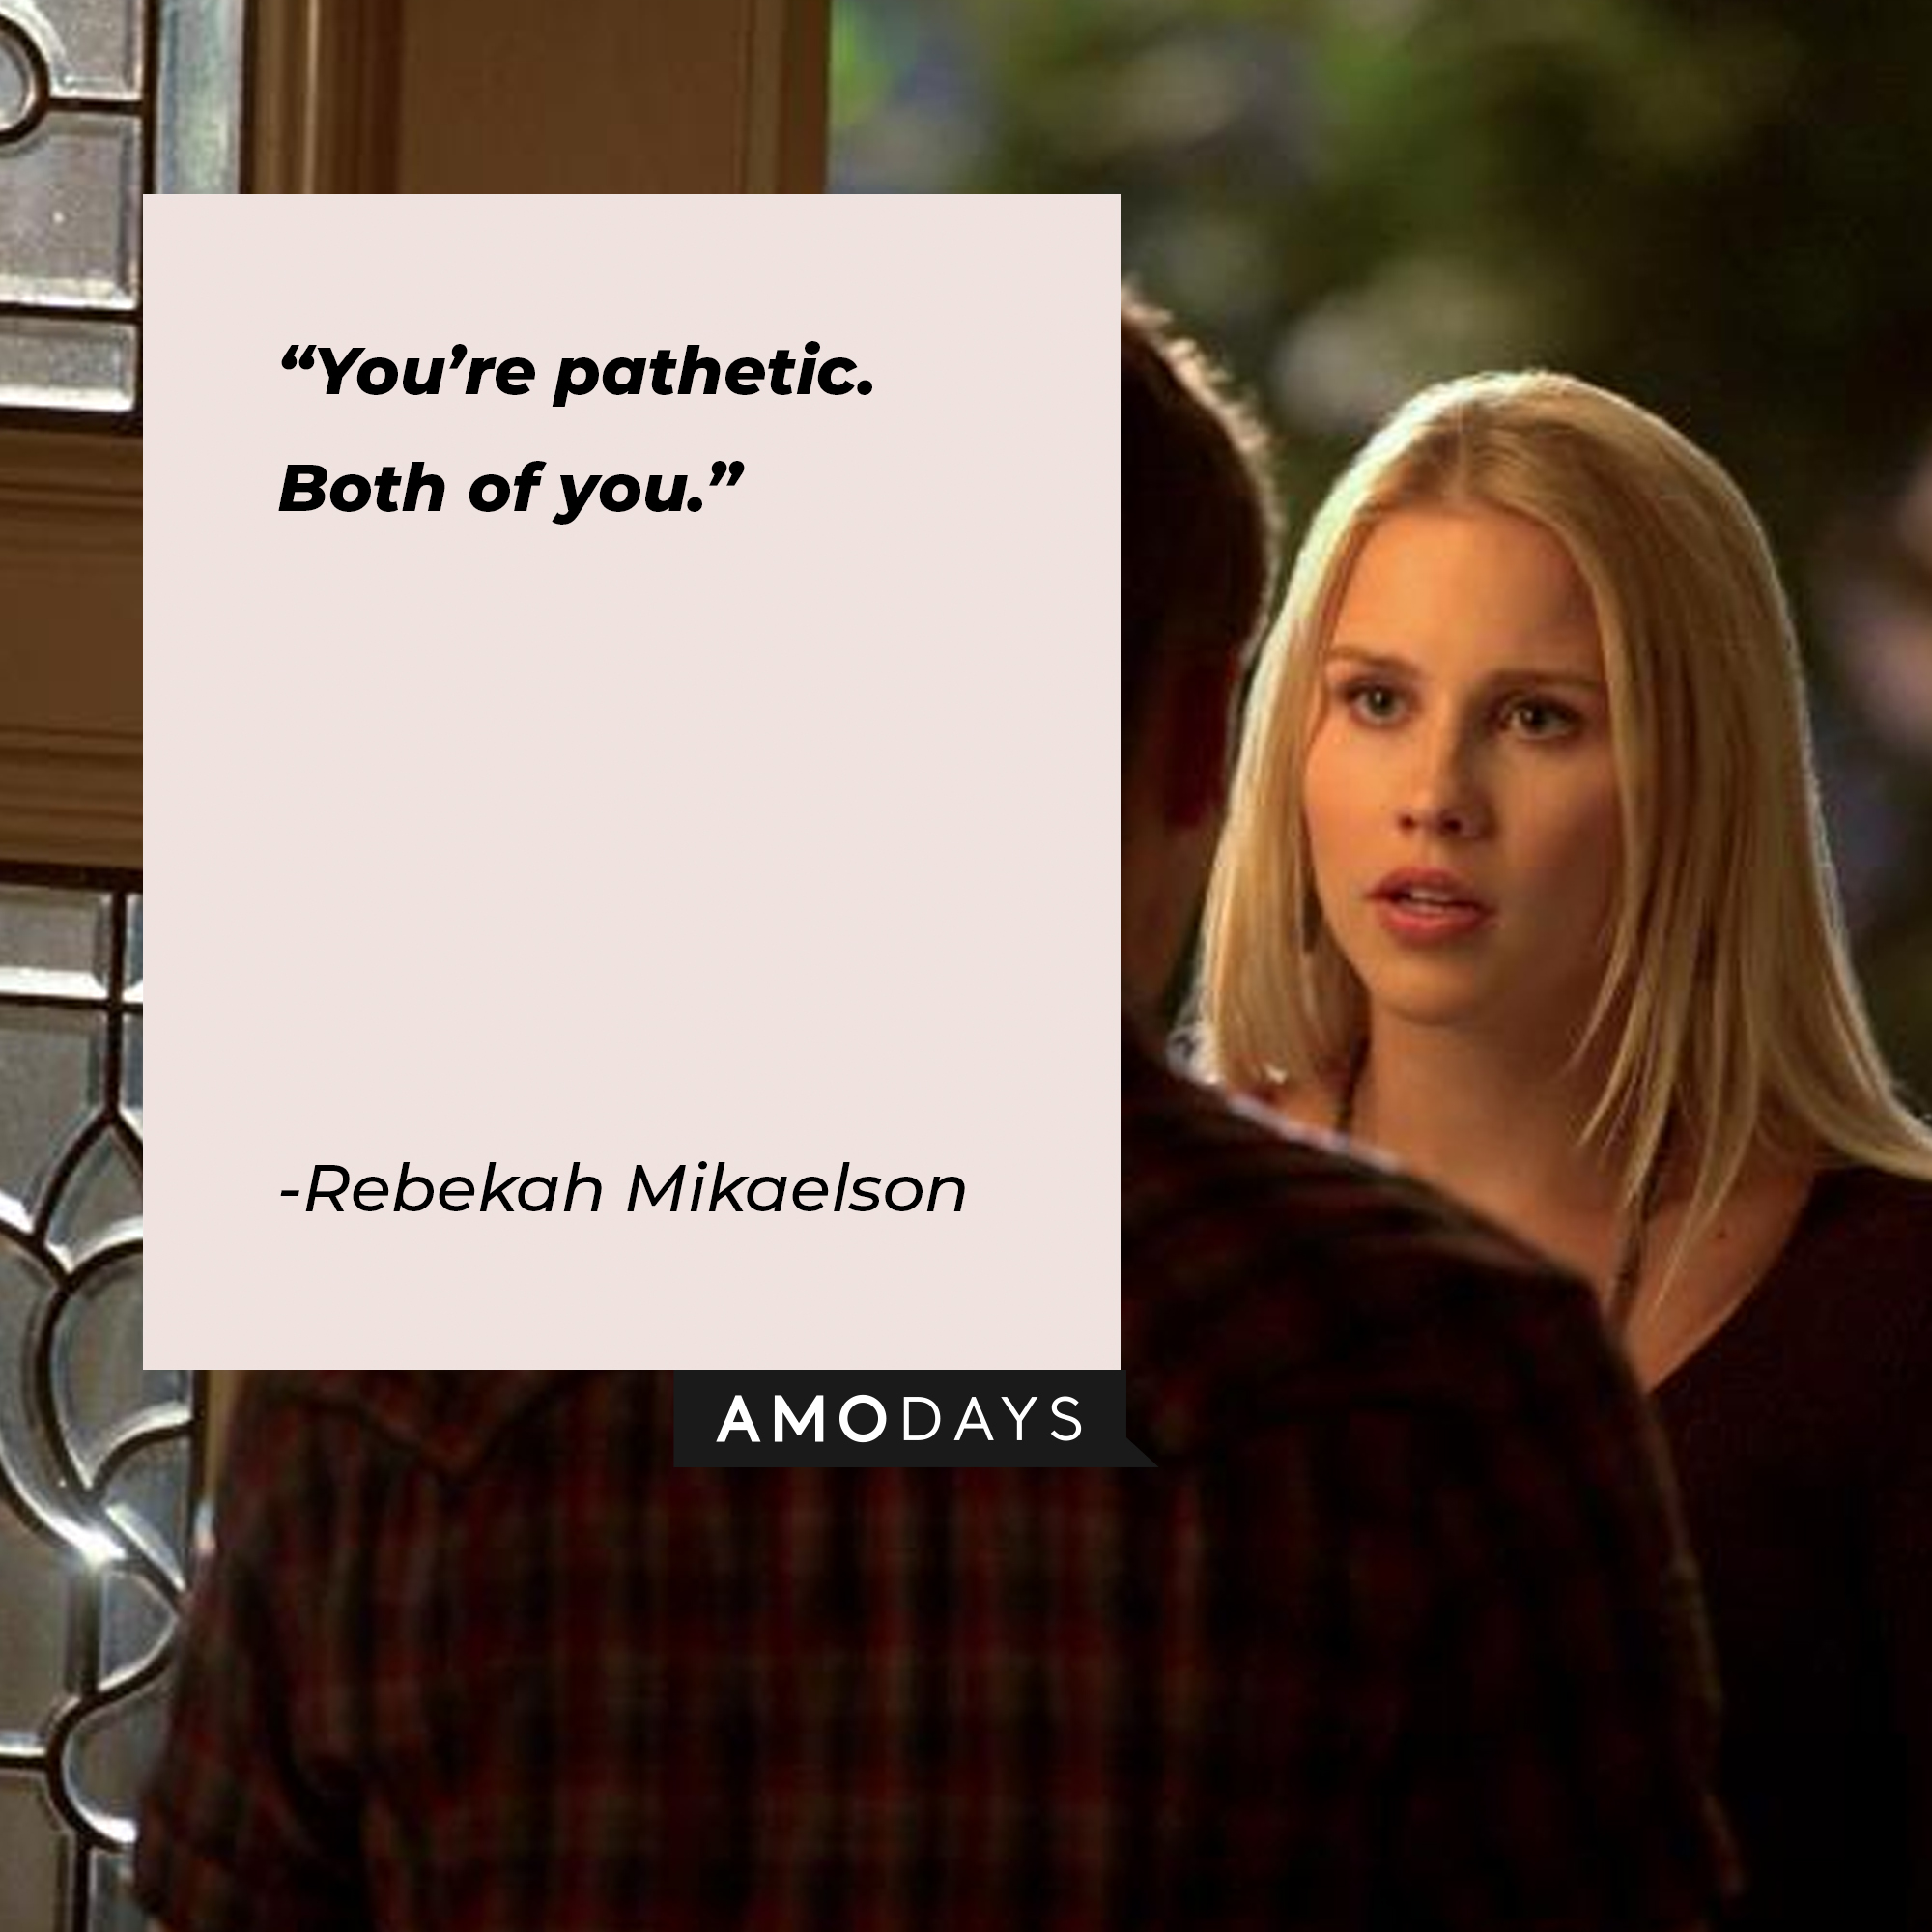 An image of Rebekah Mikaelson with her quote: “You’re pathetic. Both of you.” | Source: facebook.com/thevampirediaries